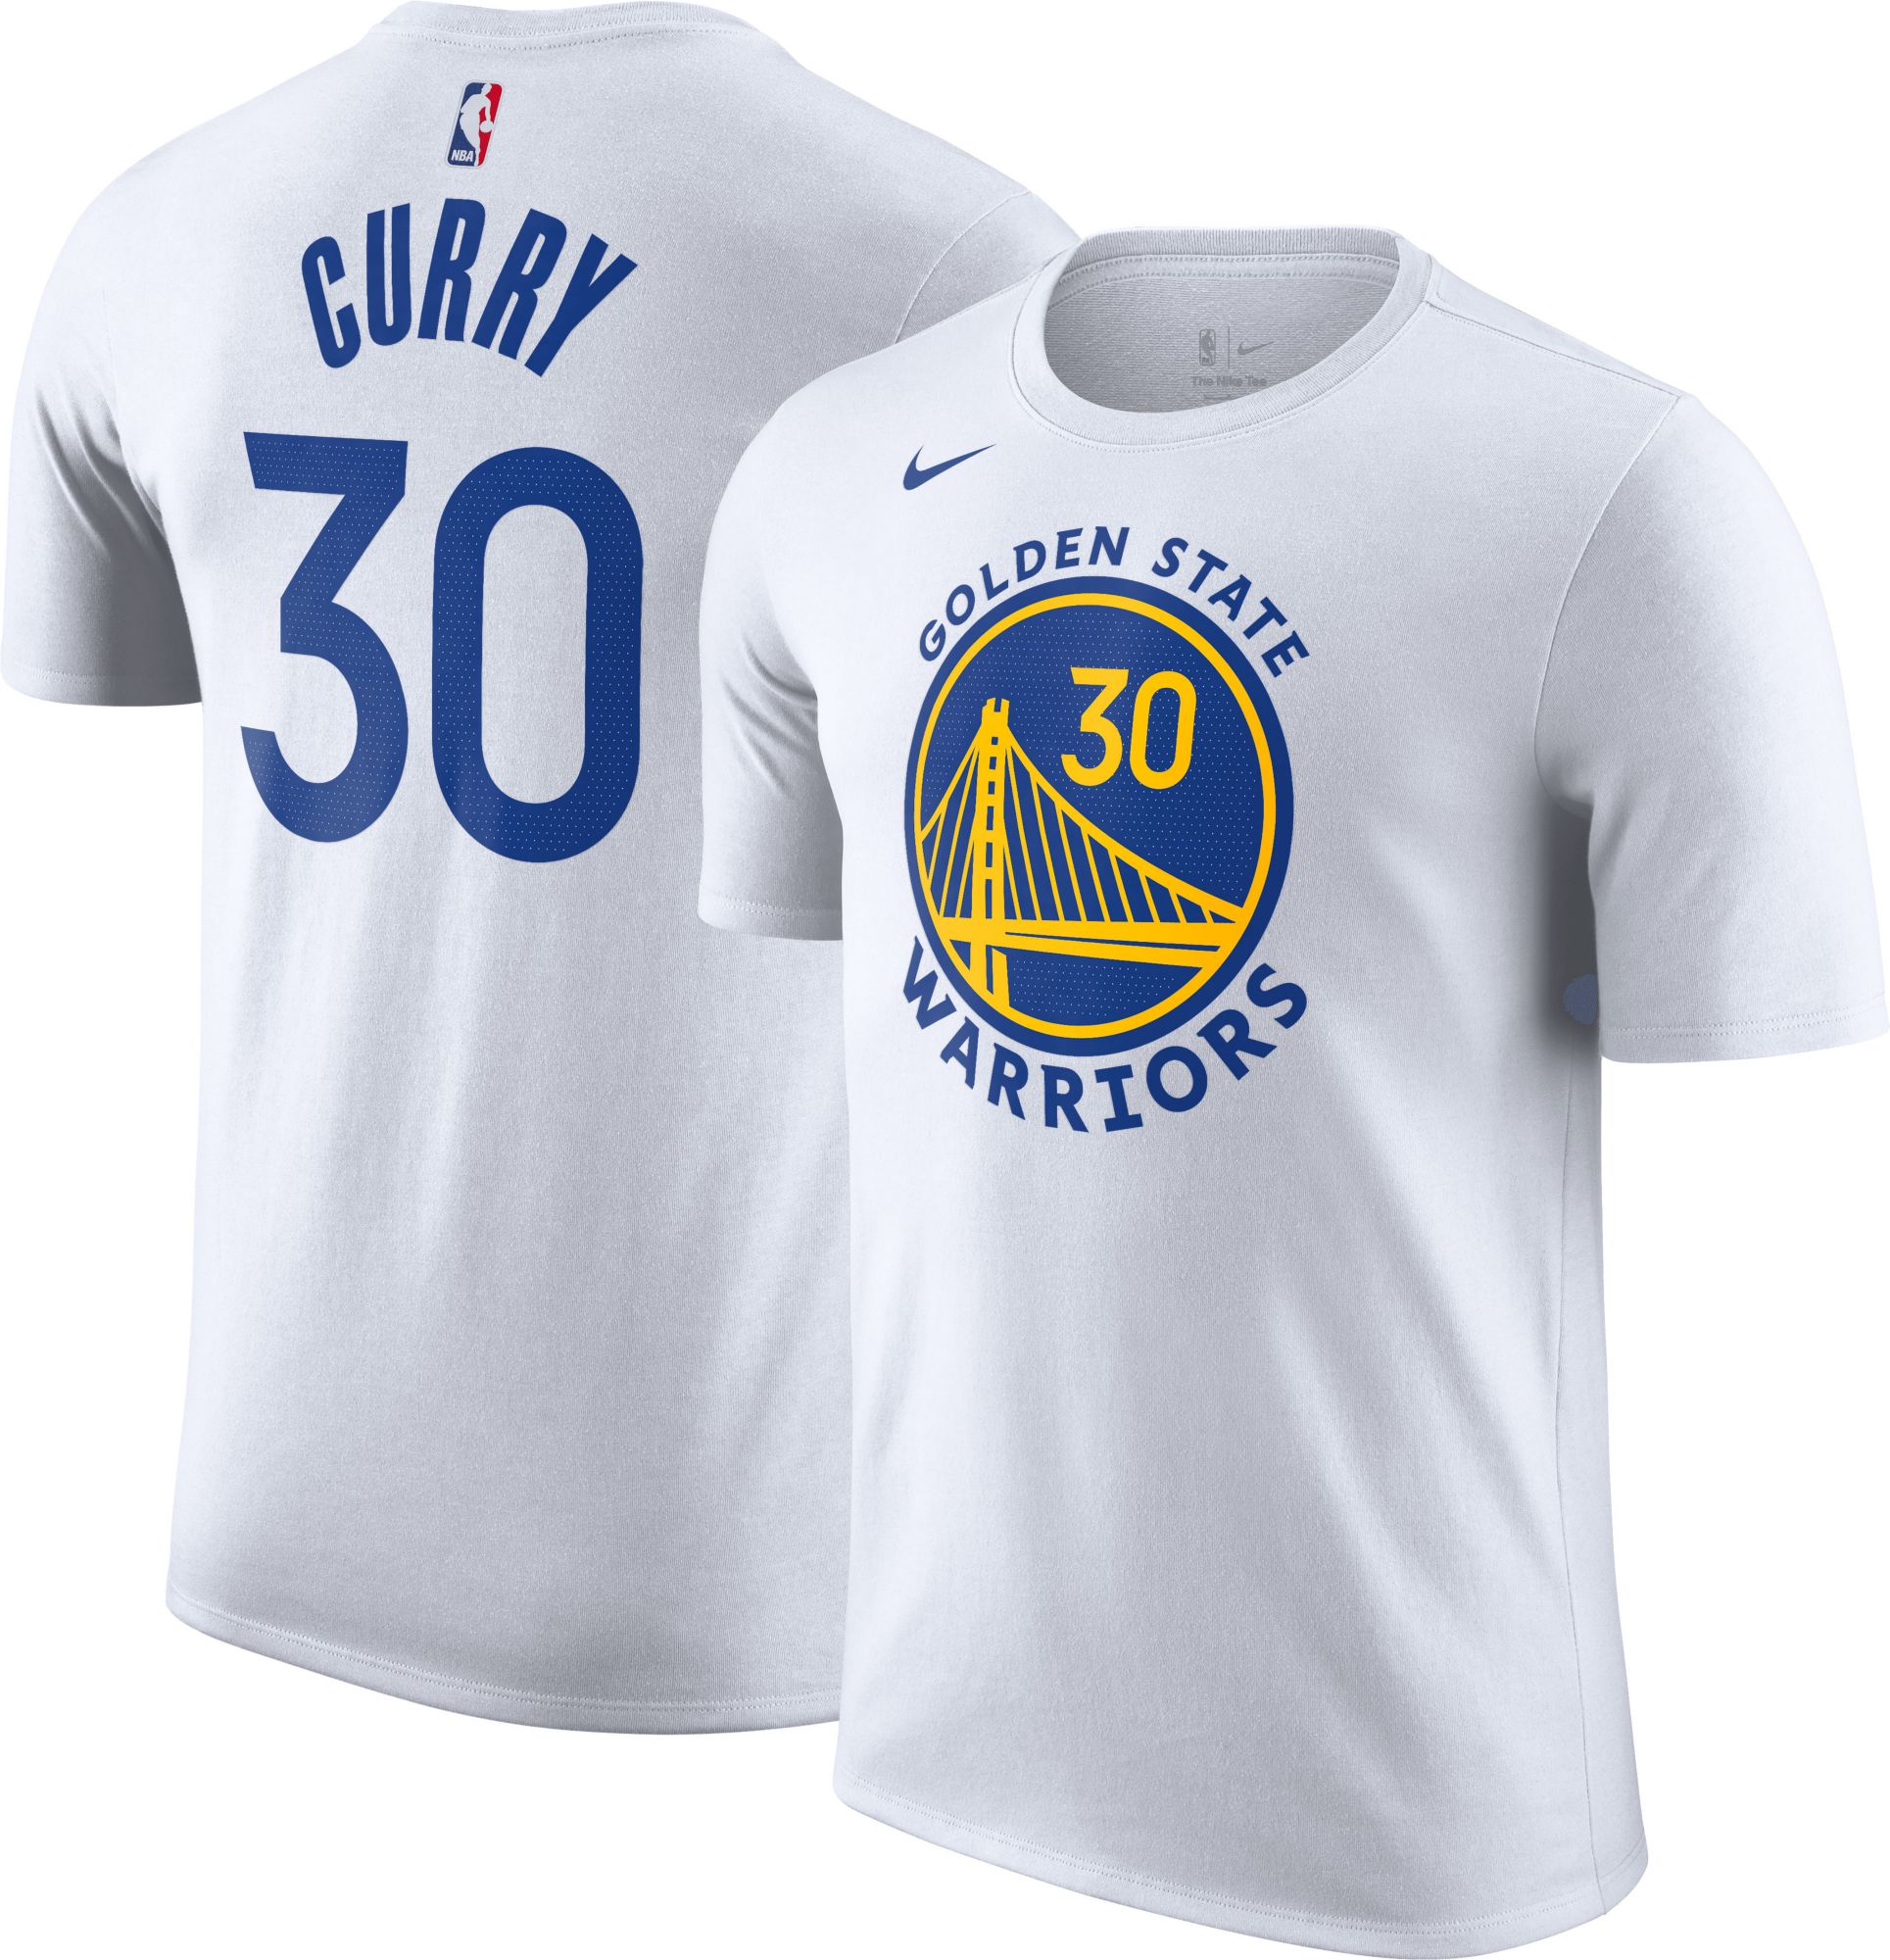 2022-2023 NIKE GOLDEN STATE WARRIORS “STEPHEN CURRY” CLASSIC